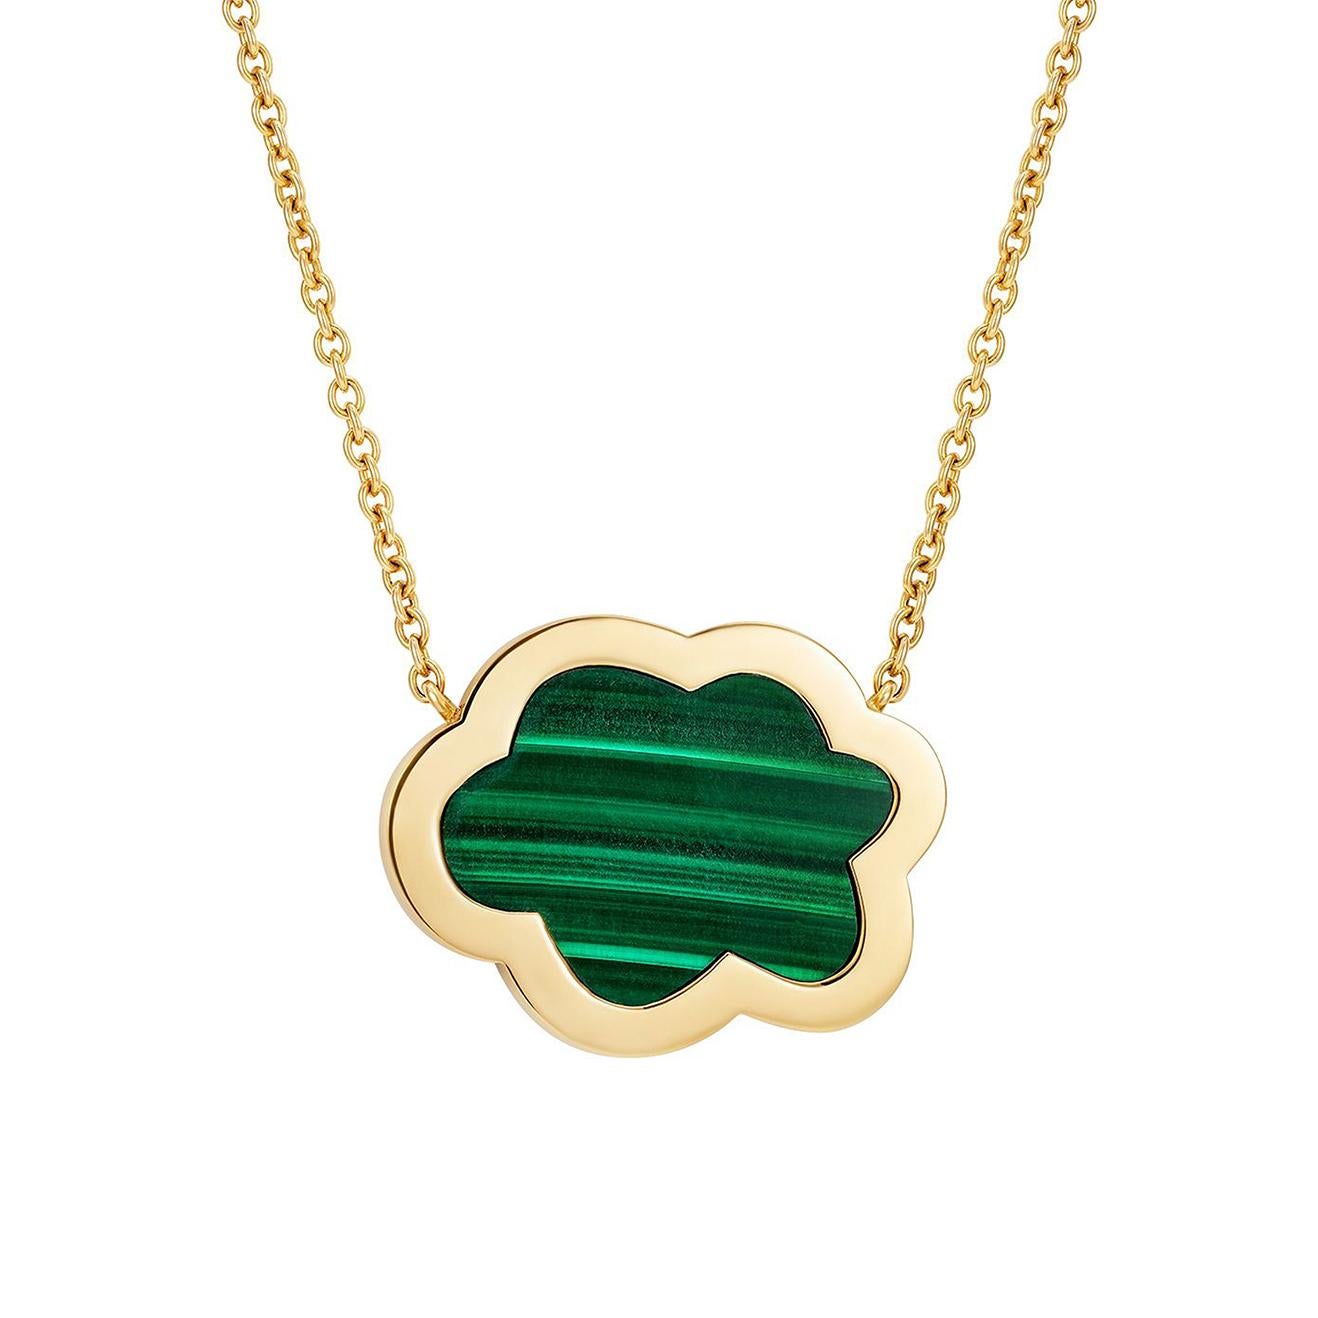 Inspired by life in London and a whimsical take on British weather, this beautiful Cloud 9 pendant features a Malachite cloud which catches and reflects light. The cloud is surrounded by a diamond lining and, as this pendant is reversible, it can be